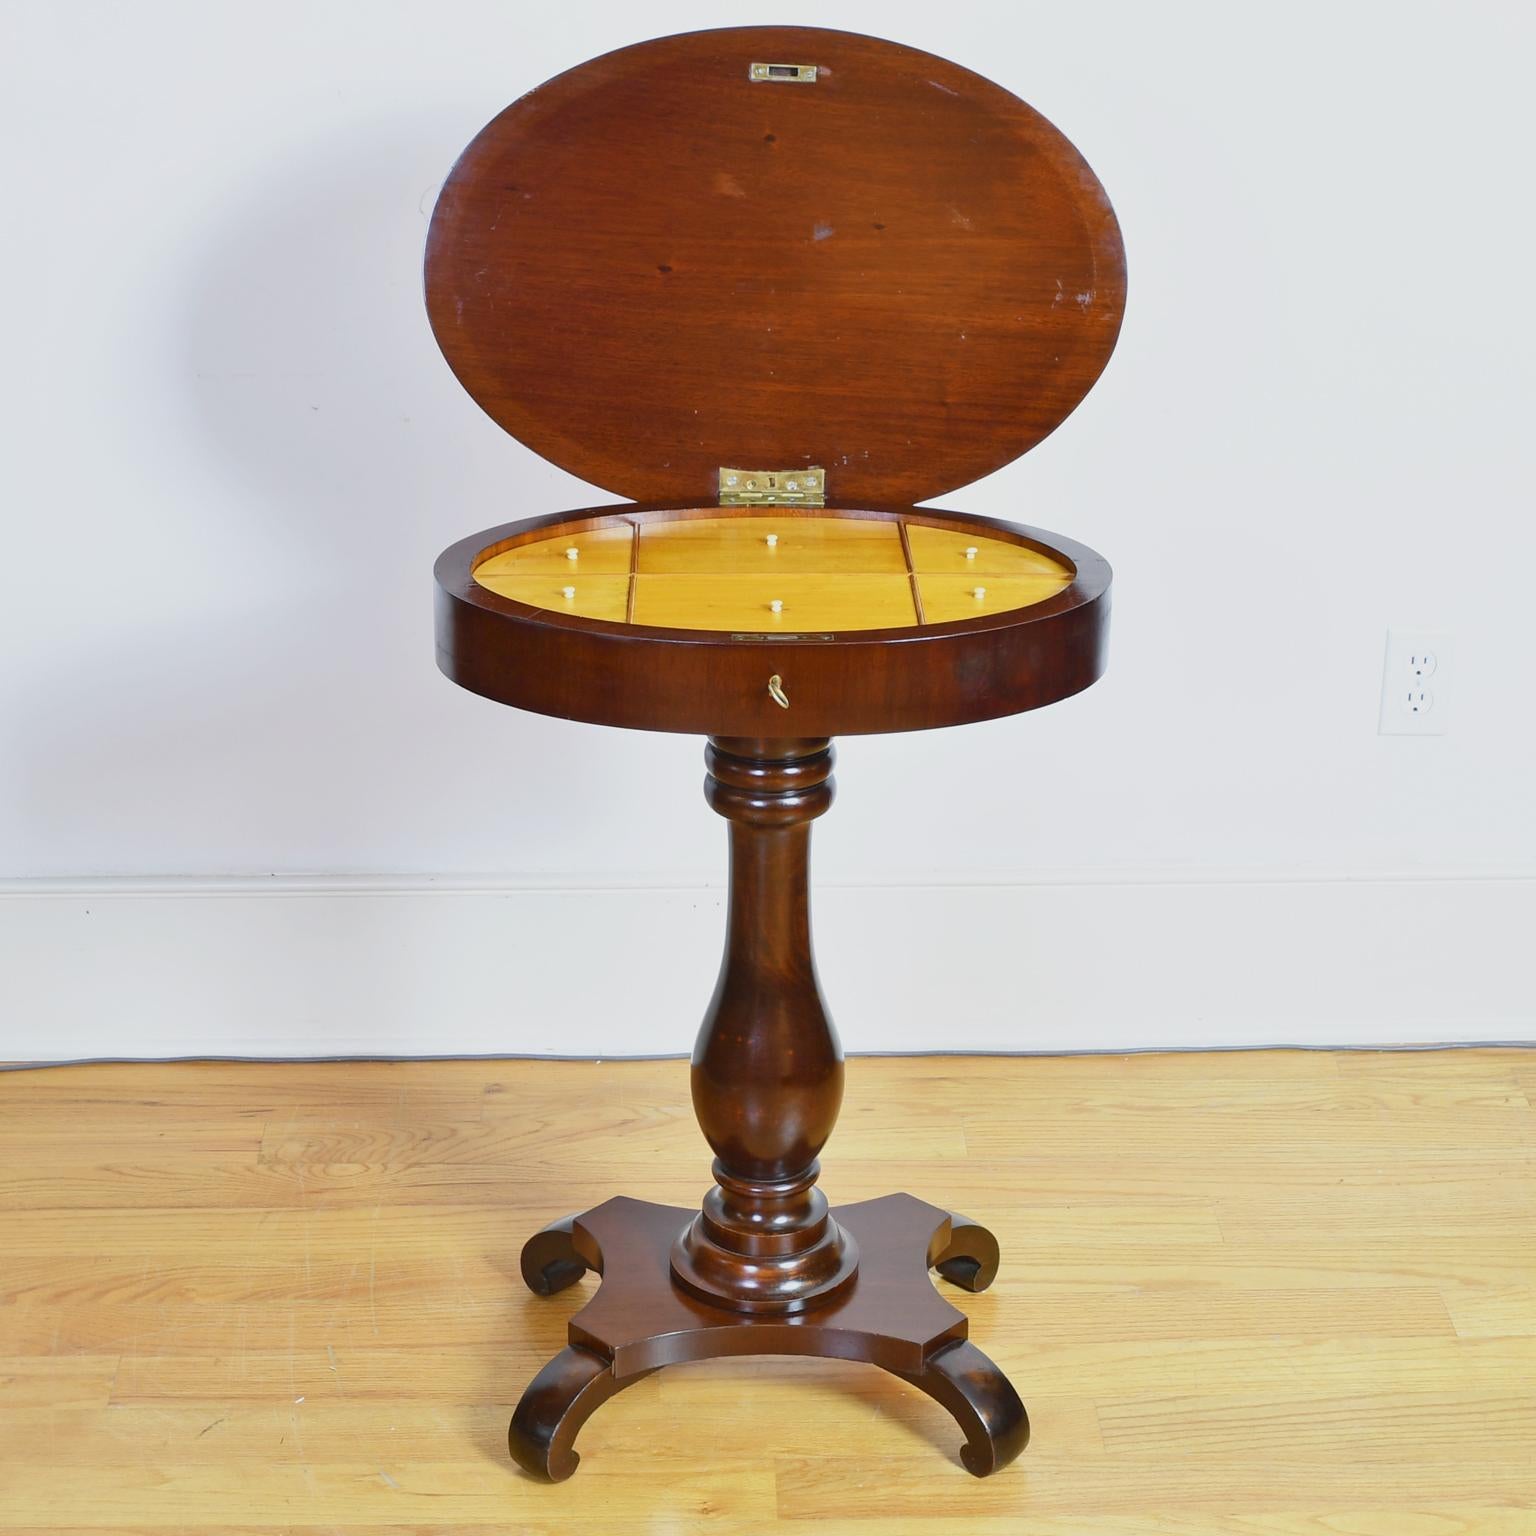 A handsome early 20th century small salon table in a dark cocoa-colored mahogany with oval top on turned pedestal column with quatre-form base resting on scrolled feet. Hinged-top lifts to access a light-wood interior (likely birch) with six lidded